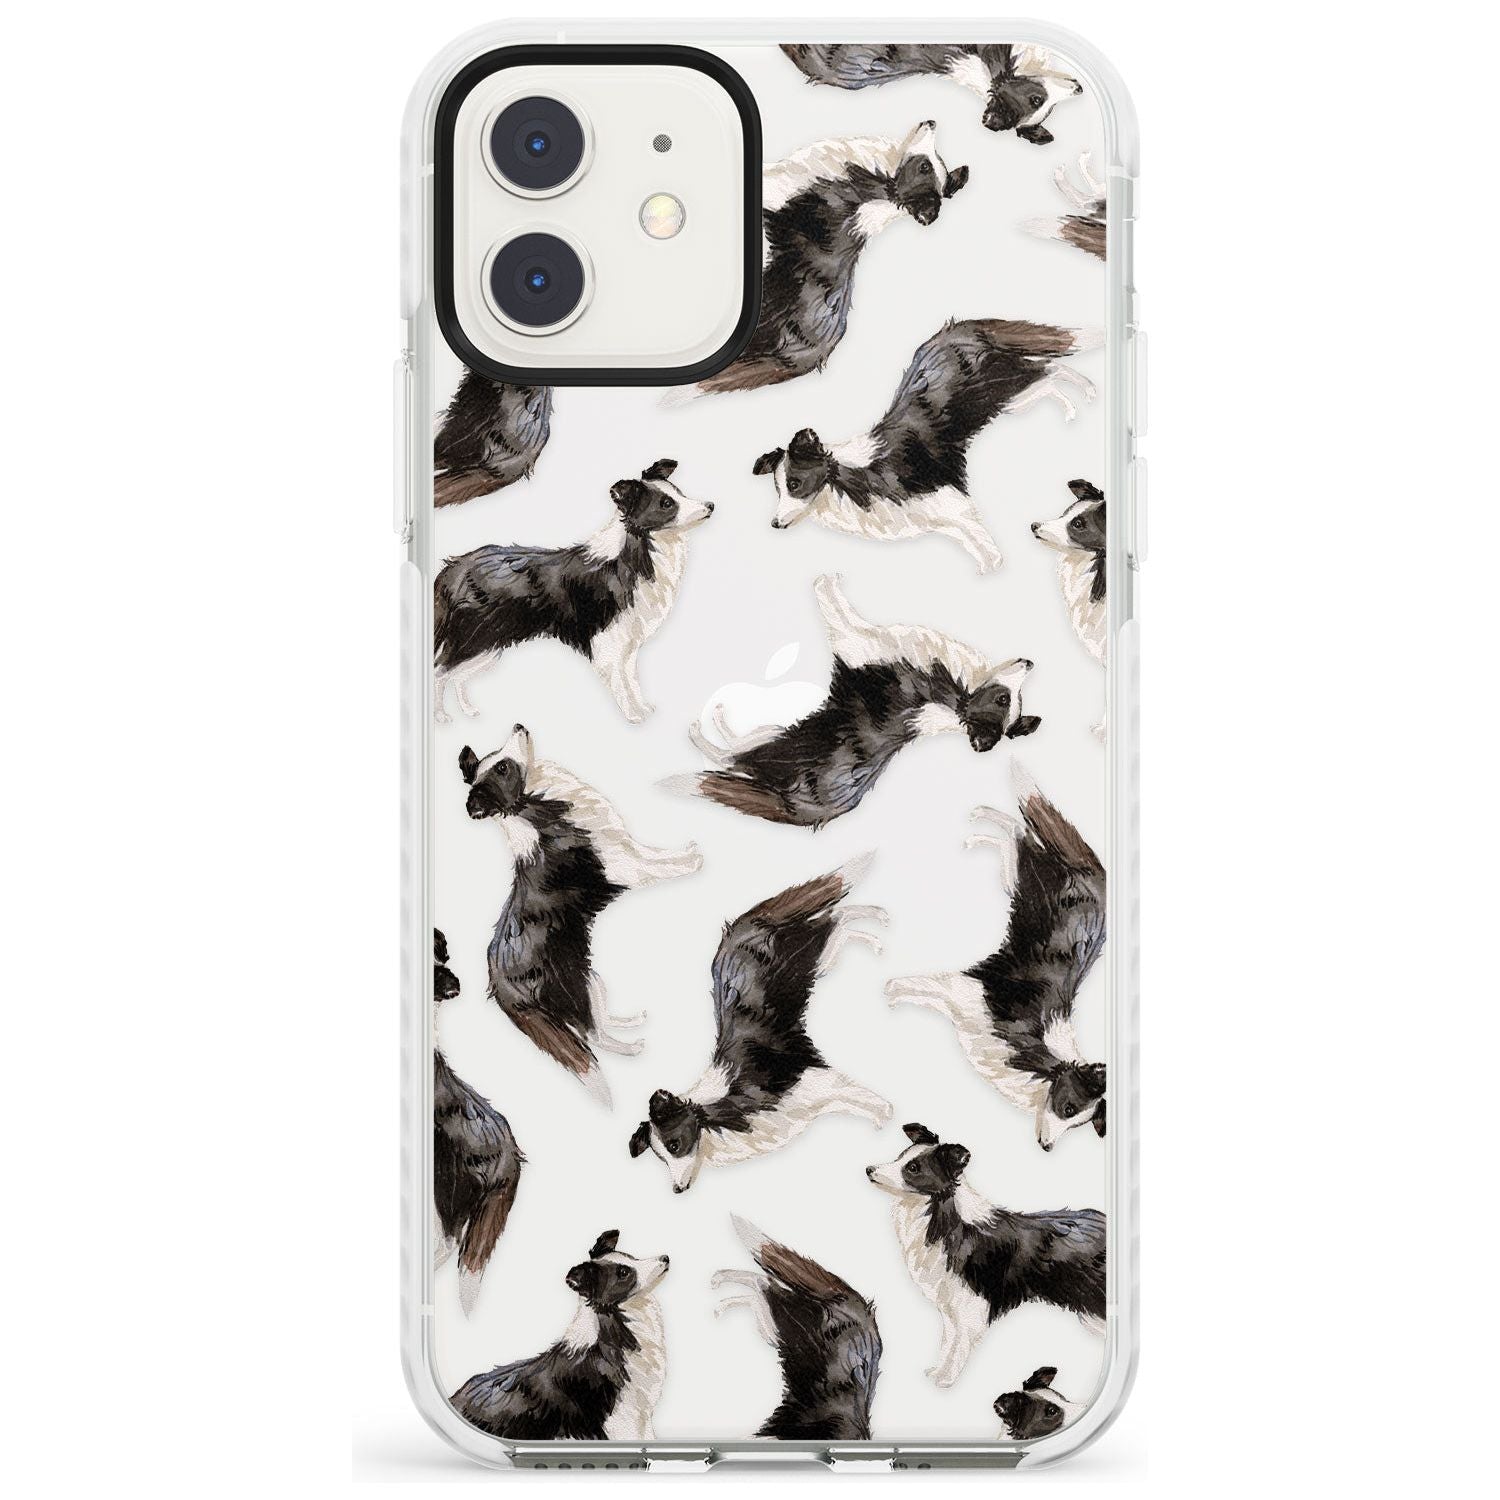 Border Collie Watercolour Dog Pattern Impact Phone Case for iPhone 11